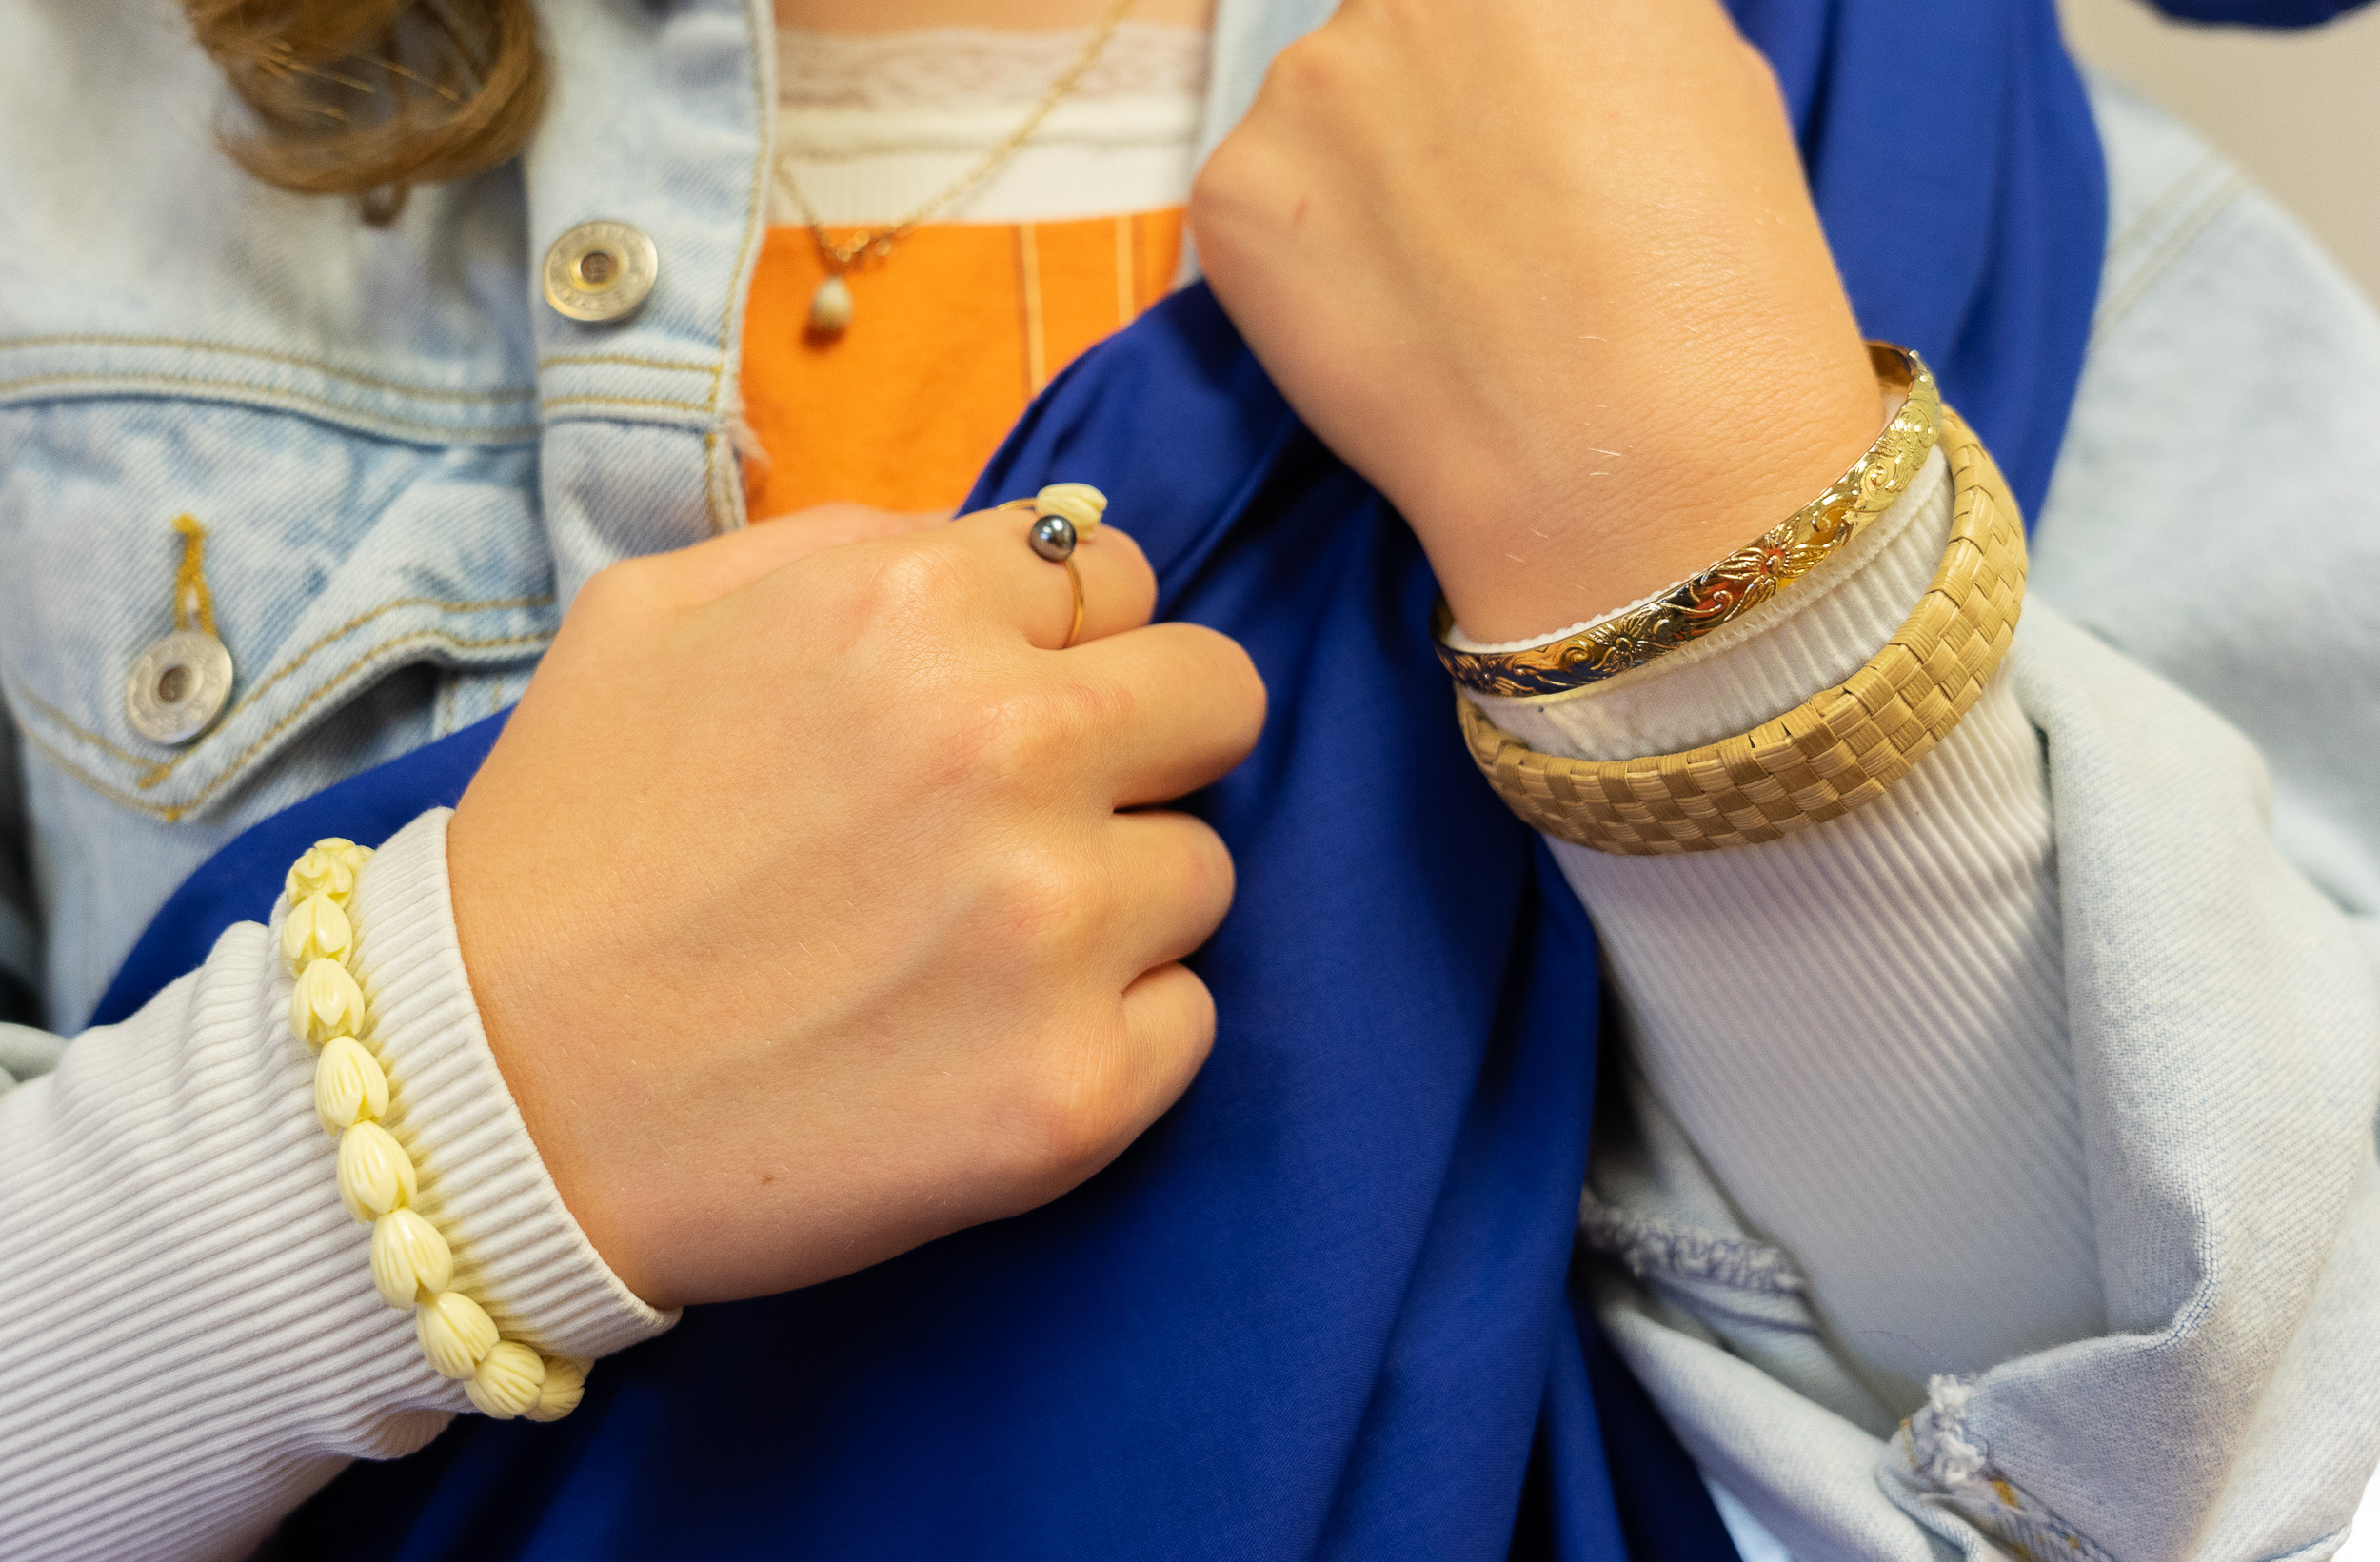 A close-up of a woman’s hands wearing Hawaiian jewelry, including a necklace, a ring and three bracelets.